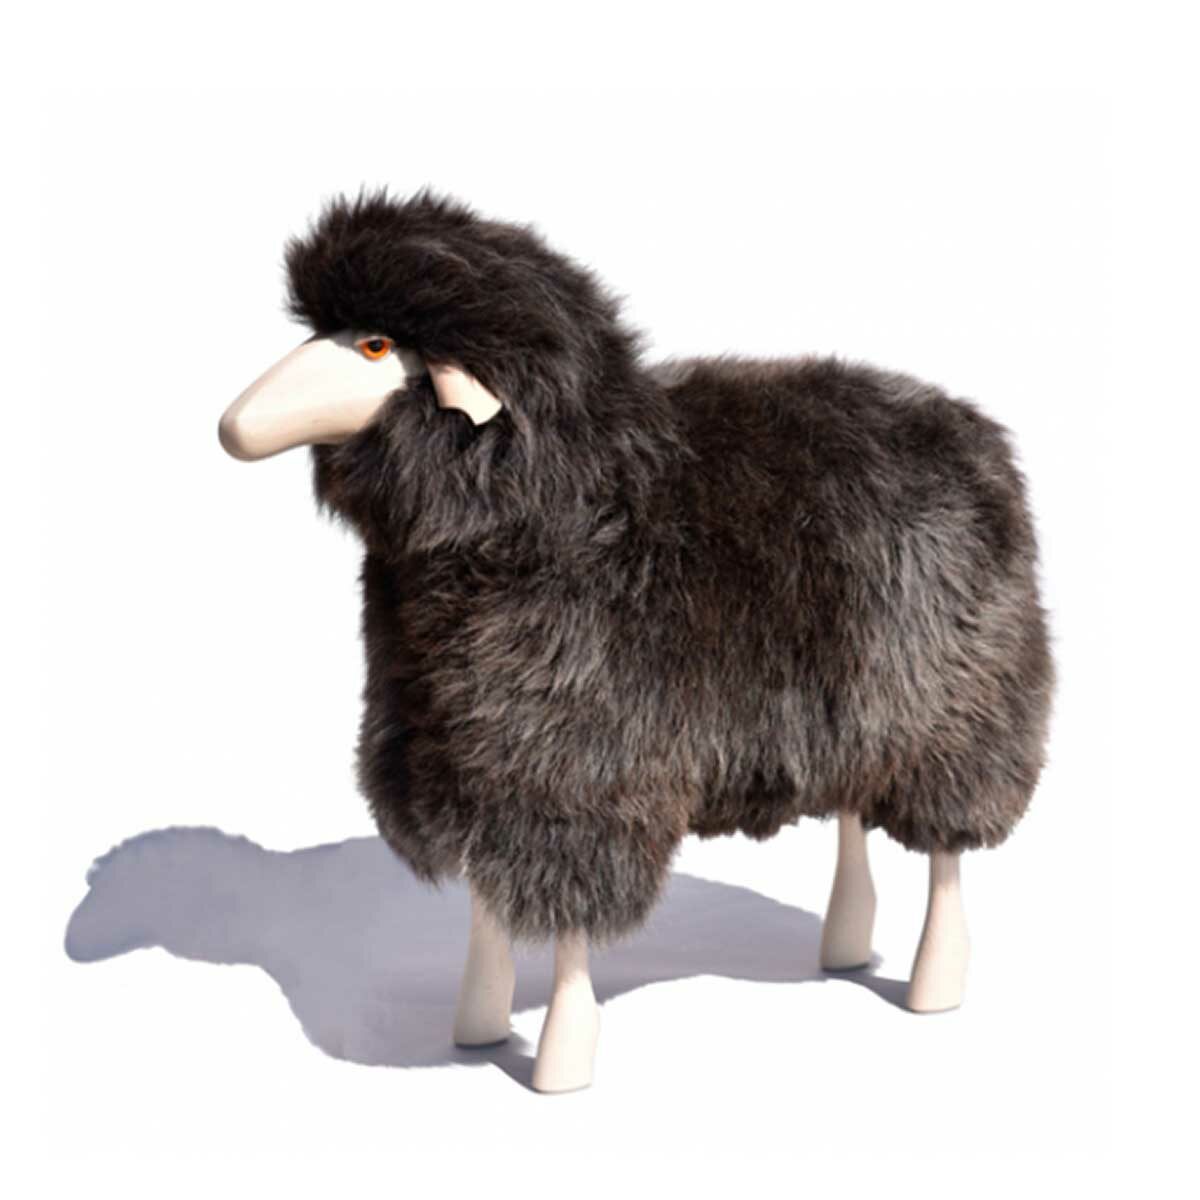 Life-size sheep with gray-brown fur